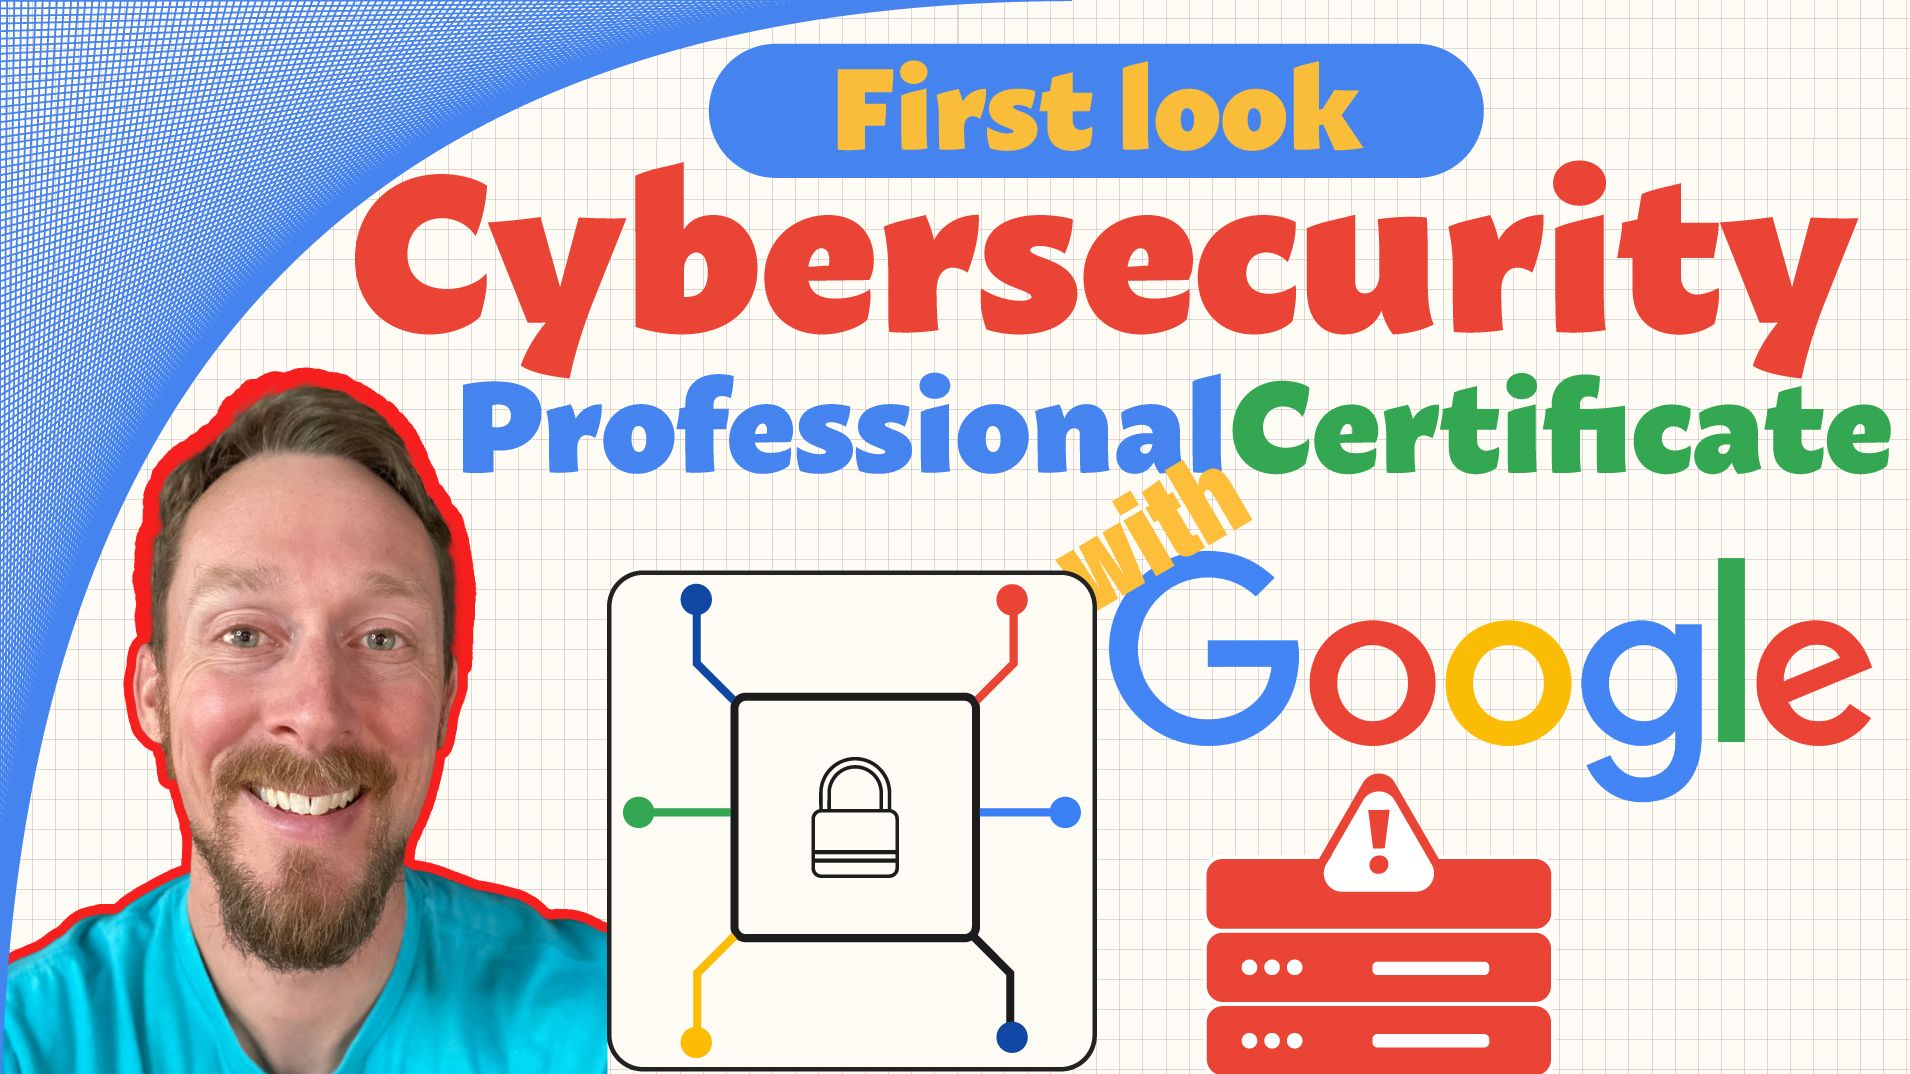 Google's New Cybersecurity Professional Certificate Explained